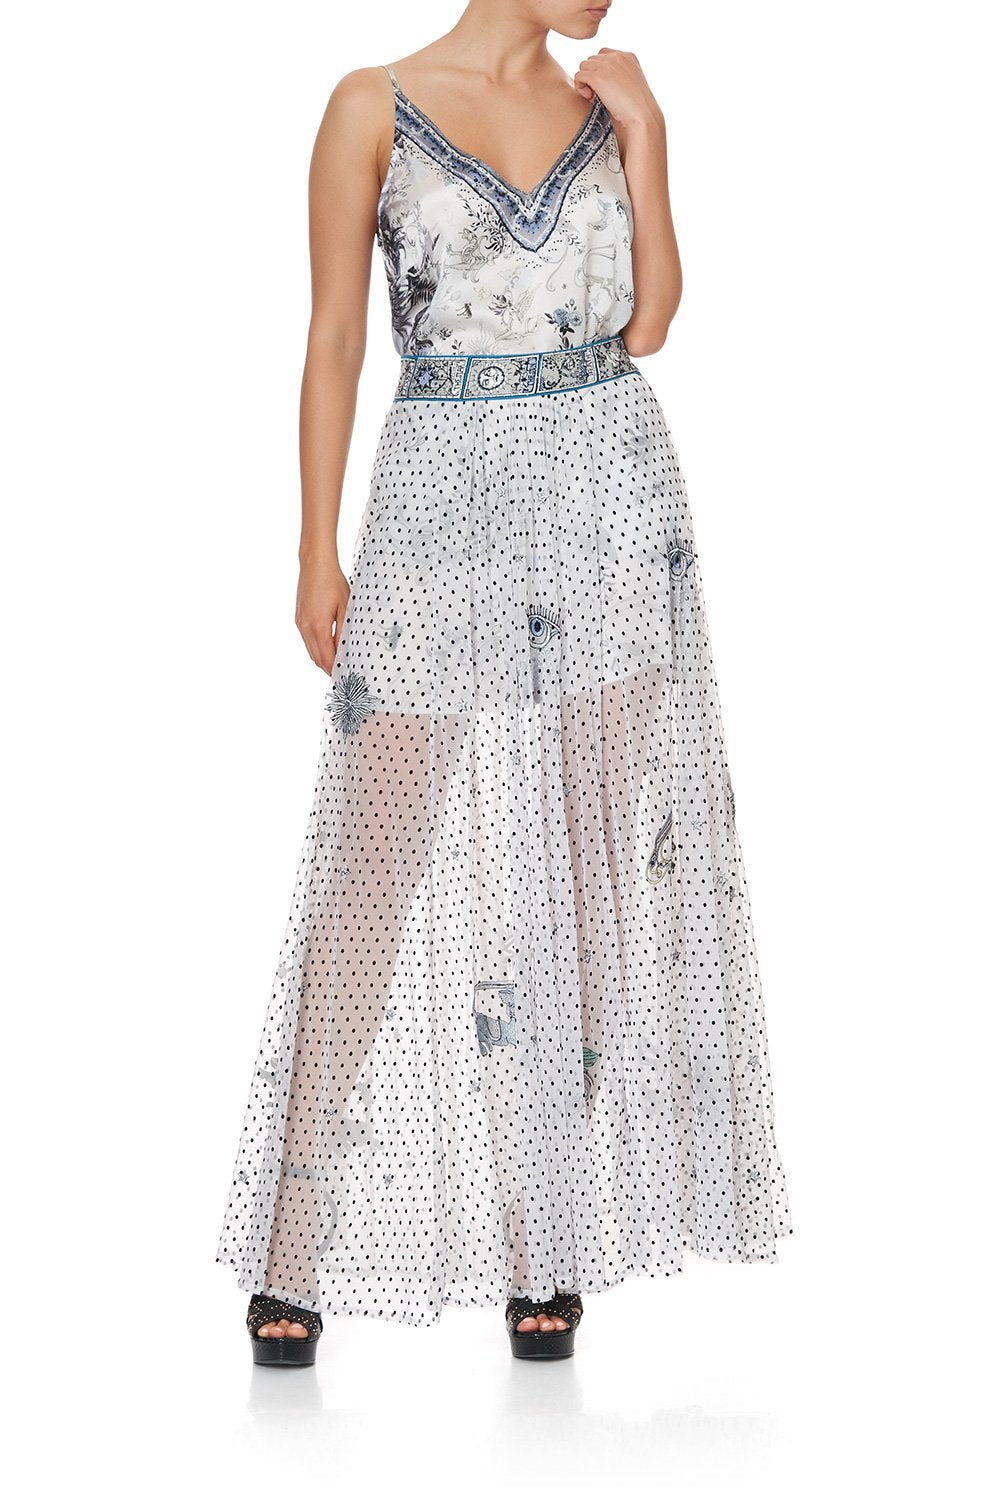 FULL SKIRT WITH GATHERED FRONT PANEL MOONLIT MUSINGS